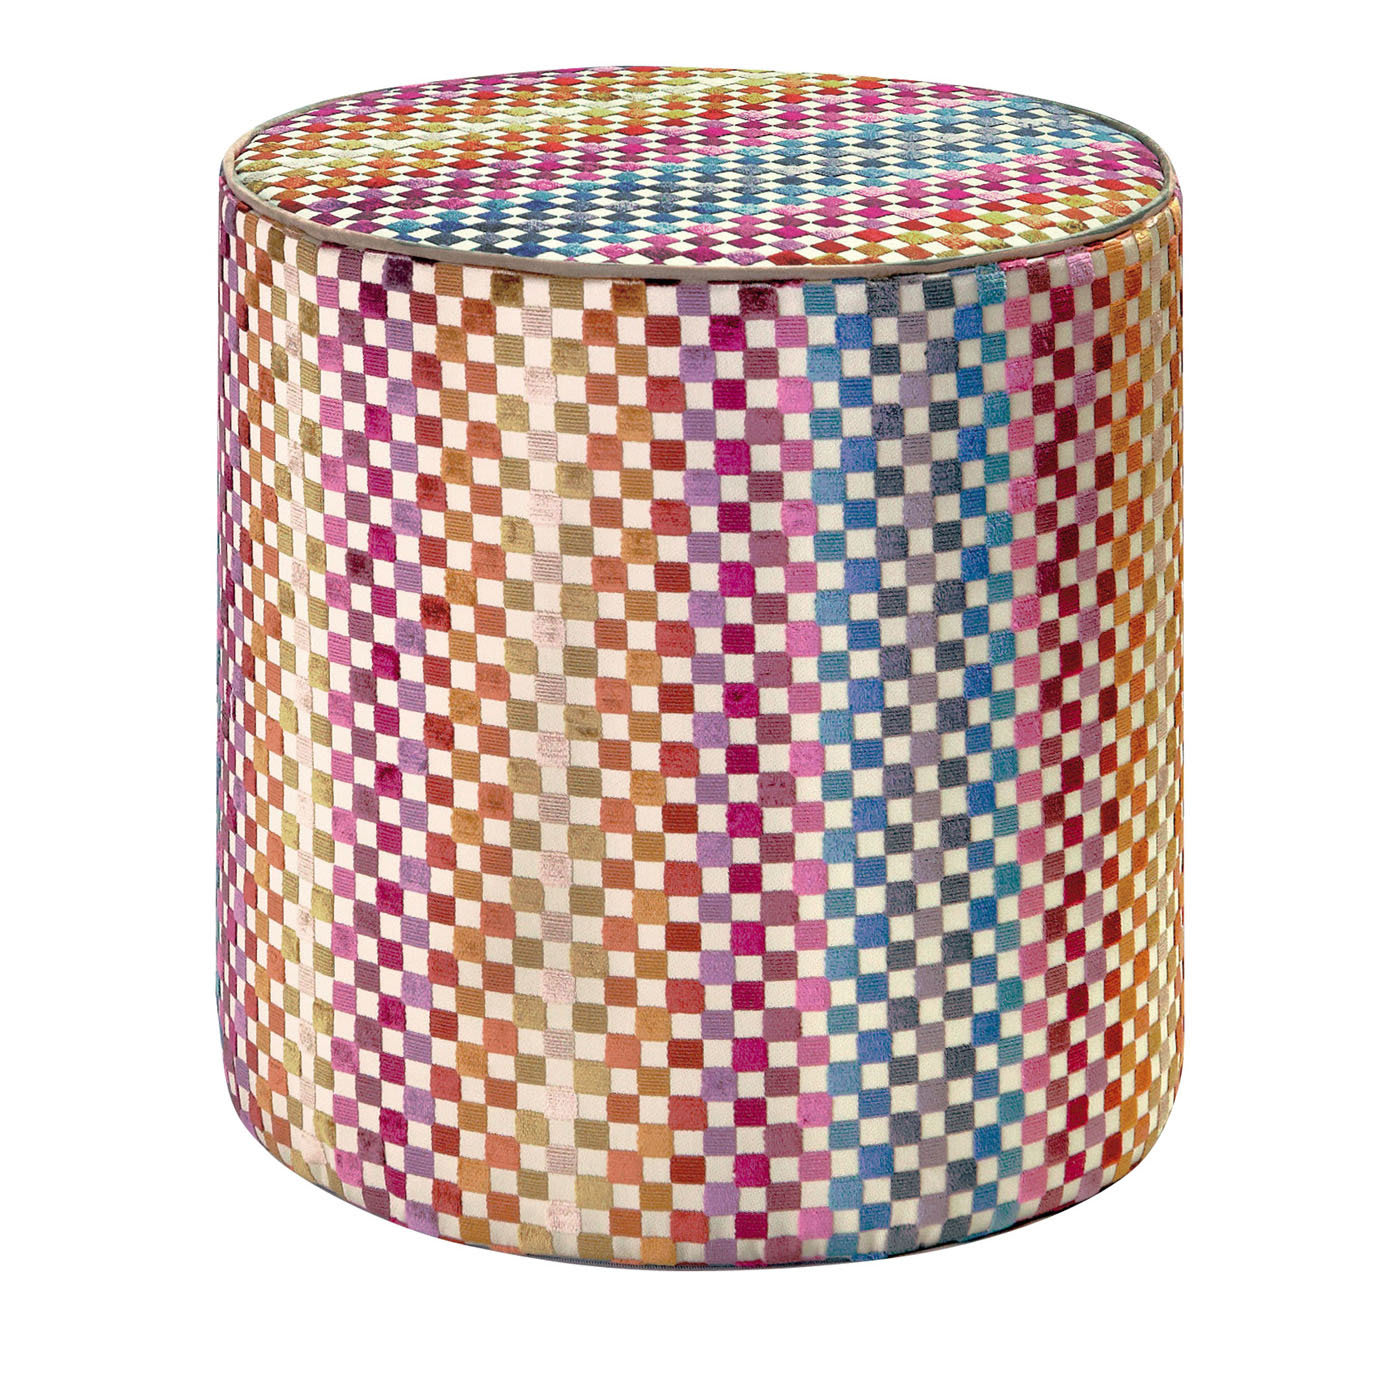 Maseko Multicolor cylinder pouf #2 - Missoni Home Collection